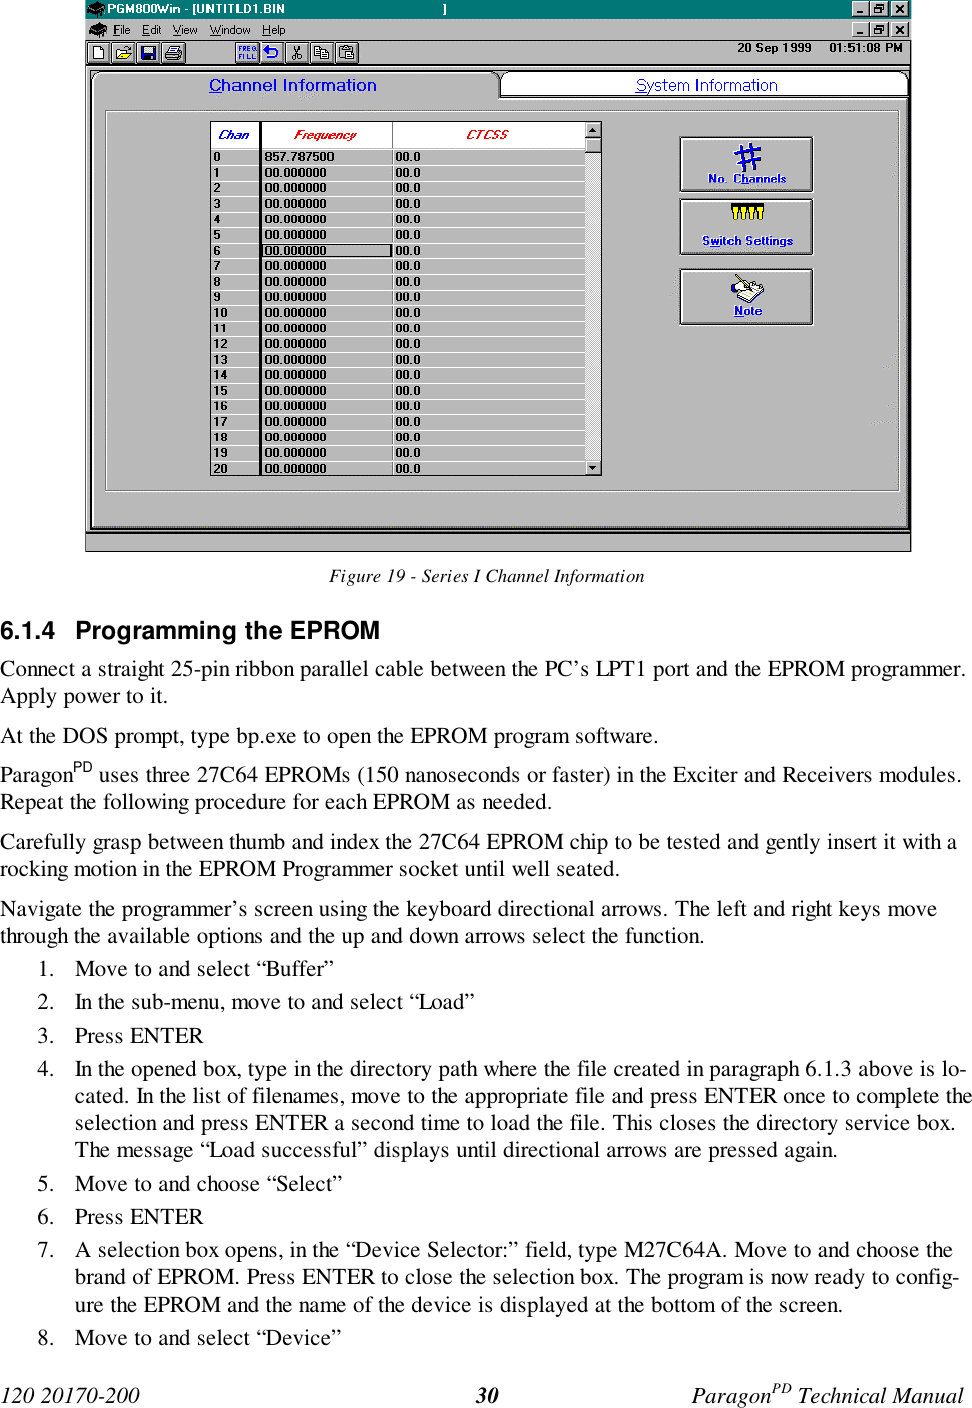 120 20170-200 ParagonPD Technical Manual30Figure 19 - Series I Channel Information6.1.4  Programming the EPROMConnect a straight 25-pin ribbon parallel cable between the PC’s LPT1 port and the EPROM programmer.Apply power to it.At the DOS prompt, type bp.exe to open the EPROM program software.ParagonPD uses three 27C64 EPROMs (150 nanoseconds or faster) in the Exciter and Receivers modules.Repeat the following procedure for each EPROM as needed.Carefully grasp between thumb and index the 27C64 EPROM chip to be tested and gently insert it with arocking motion in the EPROM Programmer socket until well seated.Navigate the programmer’s screen using the keyboard directional arrows. The left and right keys movethrough the available options and the up and down arrows select the function.1. Move to and select “Buffer”2. In the sub-menu, move to and select “Load”3. Press ENTER4. In the opened box, type in the directory path where the file created in paragraph 6.1.3 above is lo-cated. In the list of filenames, move to the appropriate file and press ENTER once to complete theselection and press ENTER a second time to load the file. This closes the directory service box.The message “Load successful” displays until directional arrows are pressed again.5. Move to and choose “Select”6. Press ENTER7. A selection box opens, in the “Device Selector:” field, type M27C64A. Move to and choose thebrand of EPROM. Press ENTER to close the selection box. The program is now ready to config-ure the EPROM and the name of the device is displayed at the bottom of the screen.8. Move to and select “Device”